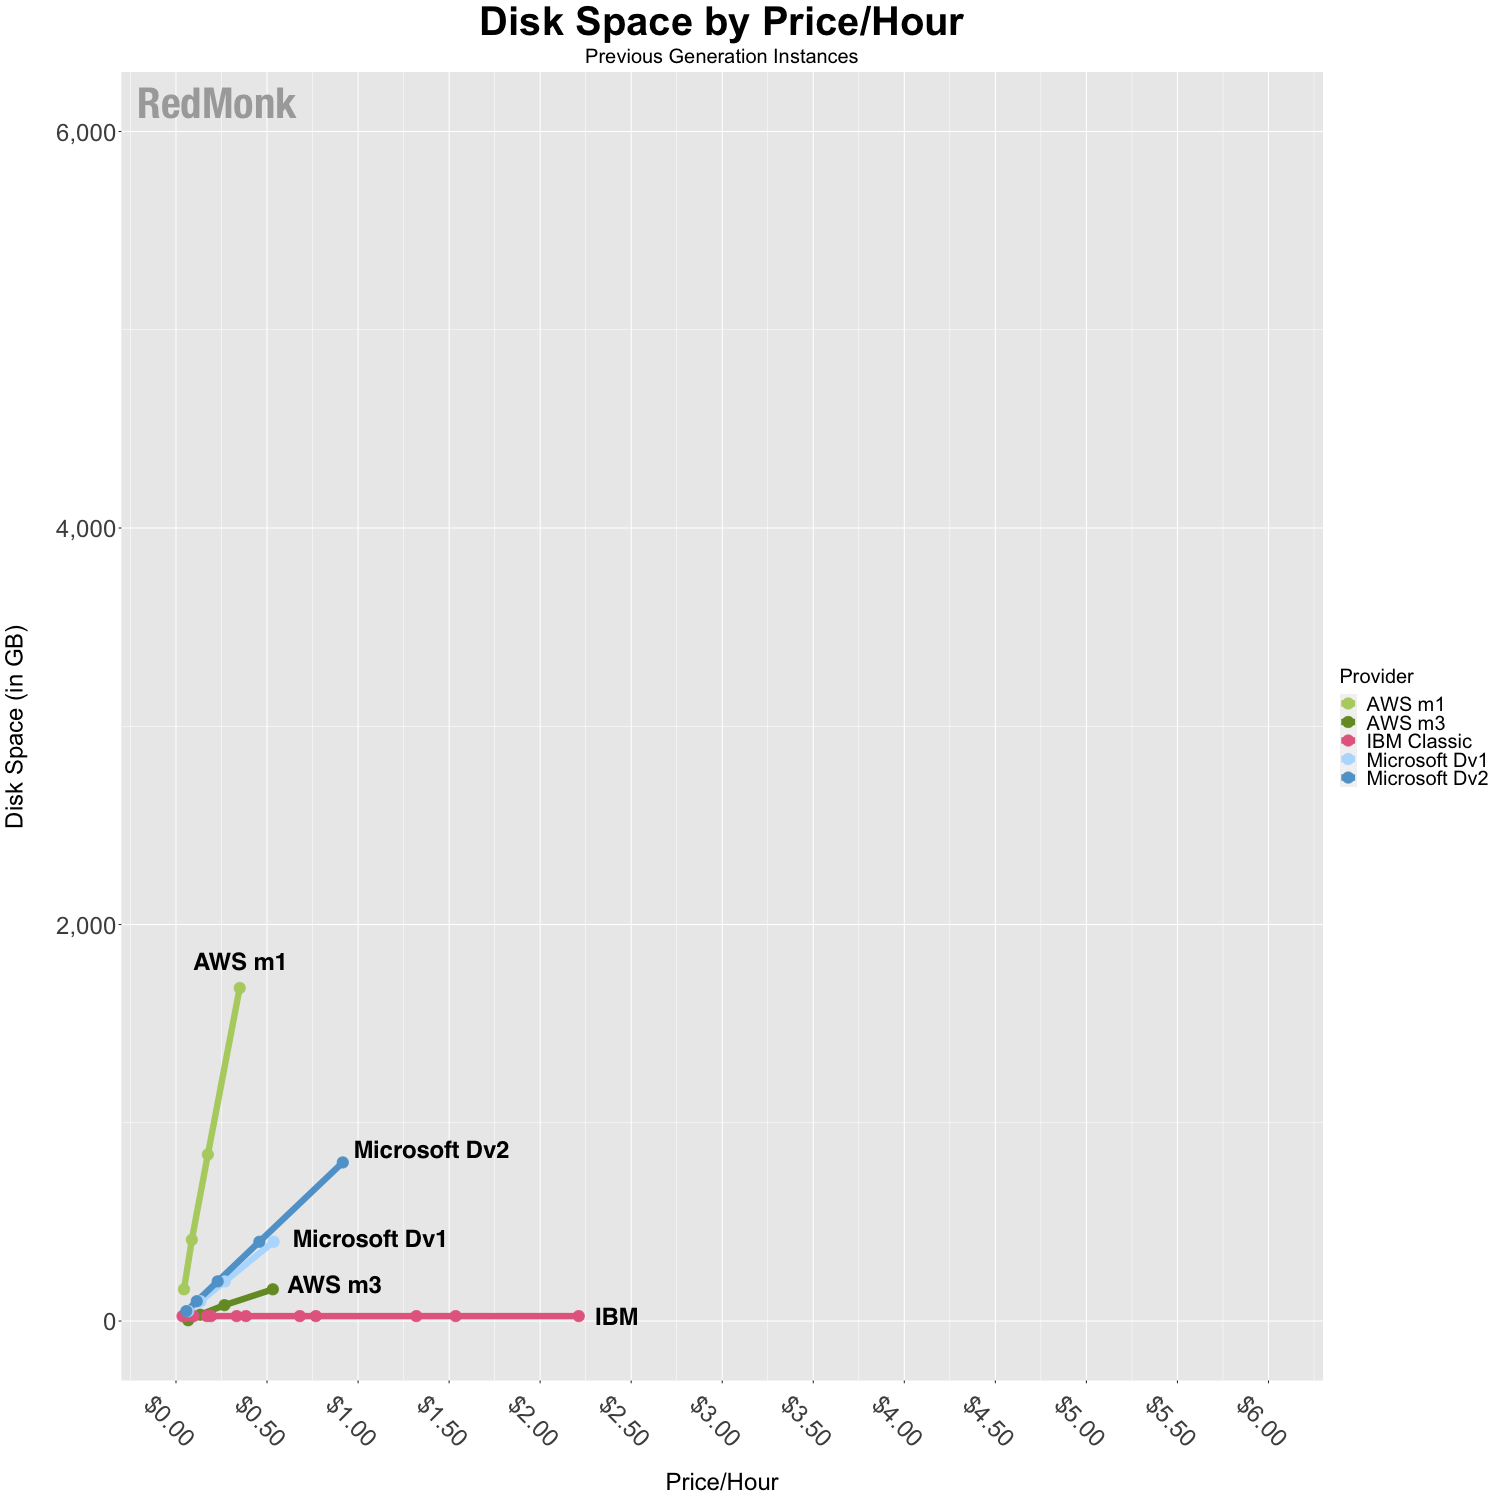 Comparison of IaaS Disk Space Pricing, previous instance generations. X-Axis is price/hour, Y-Axis is GB of Disk Space